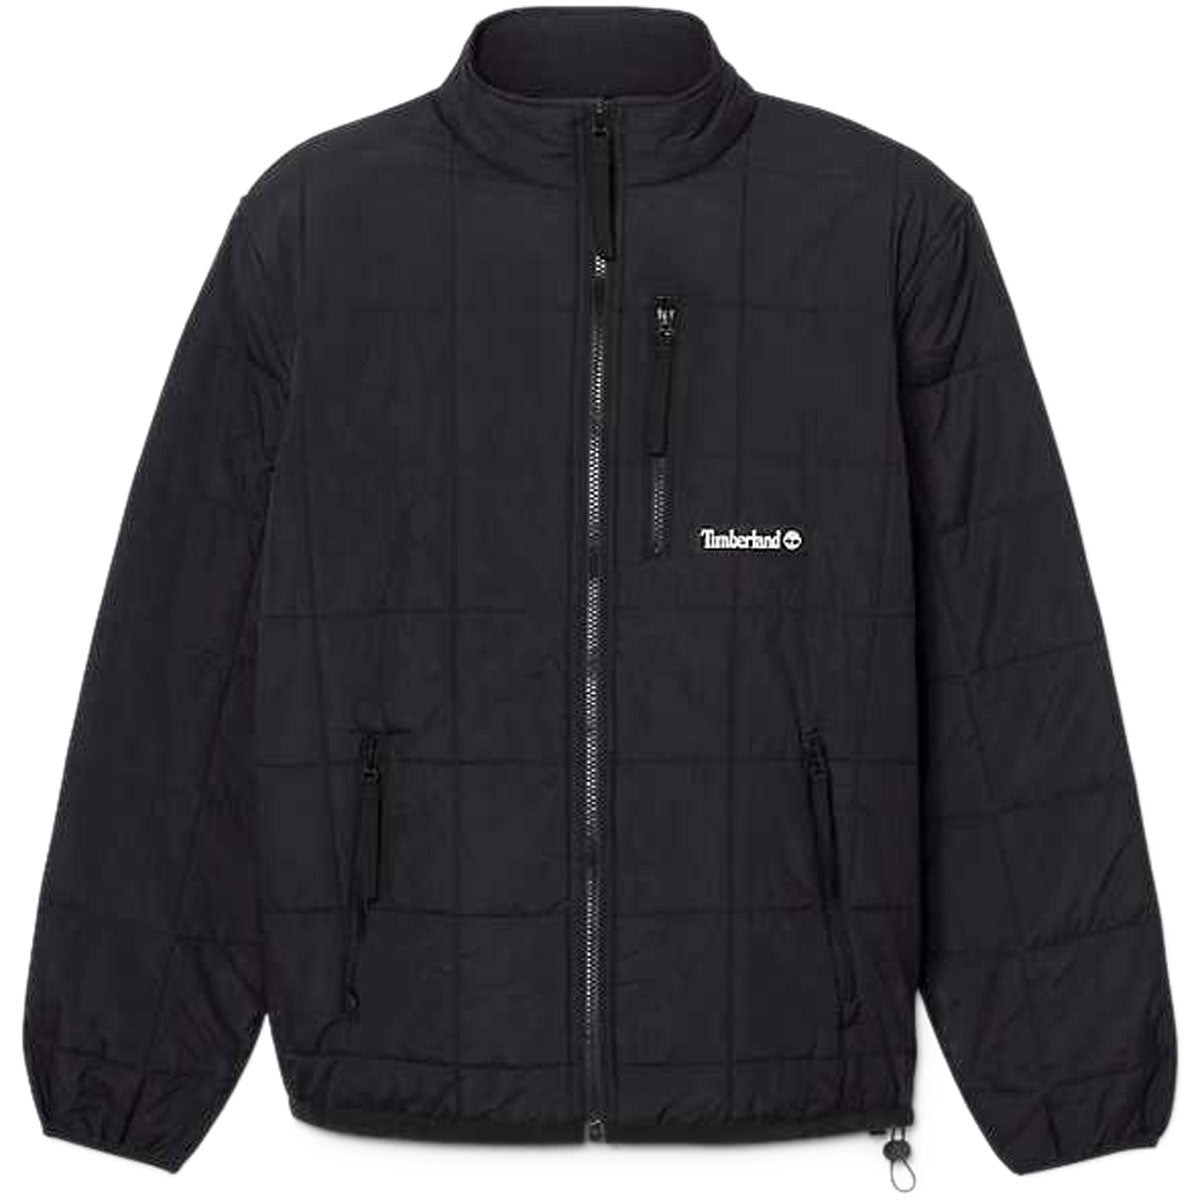 Timberland DWR Quilted Insulated Jacket - Black image 4